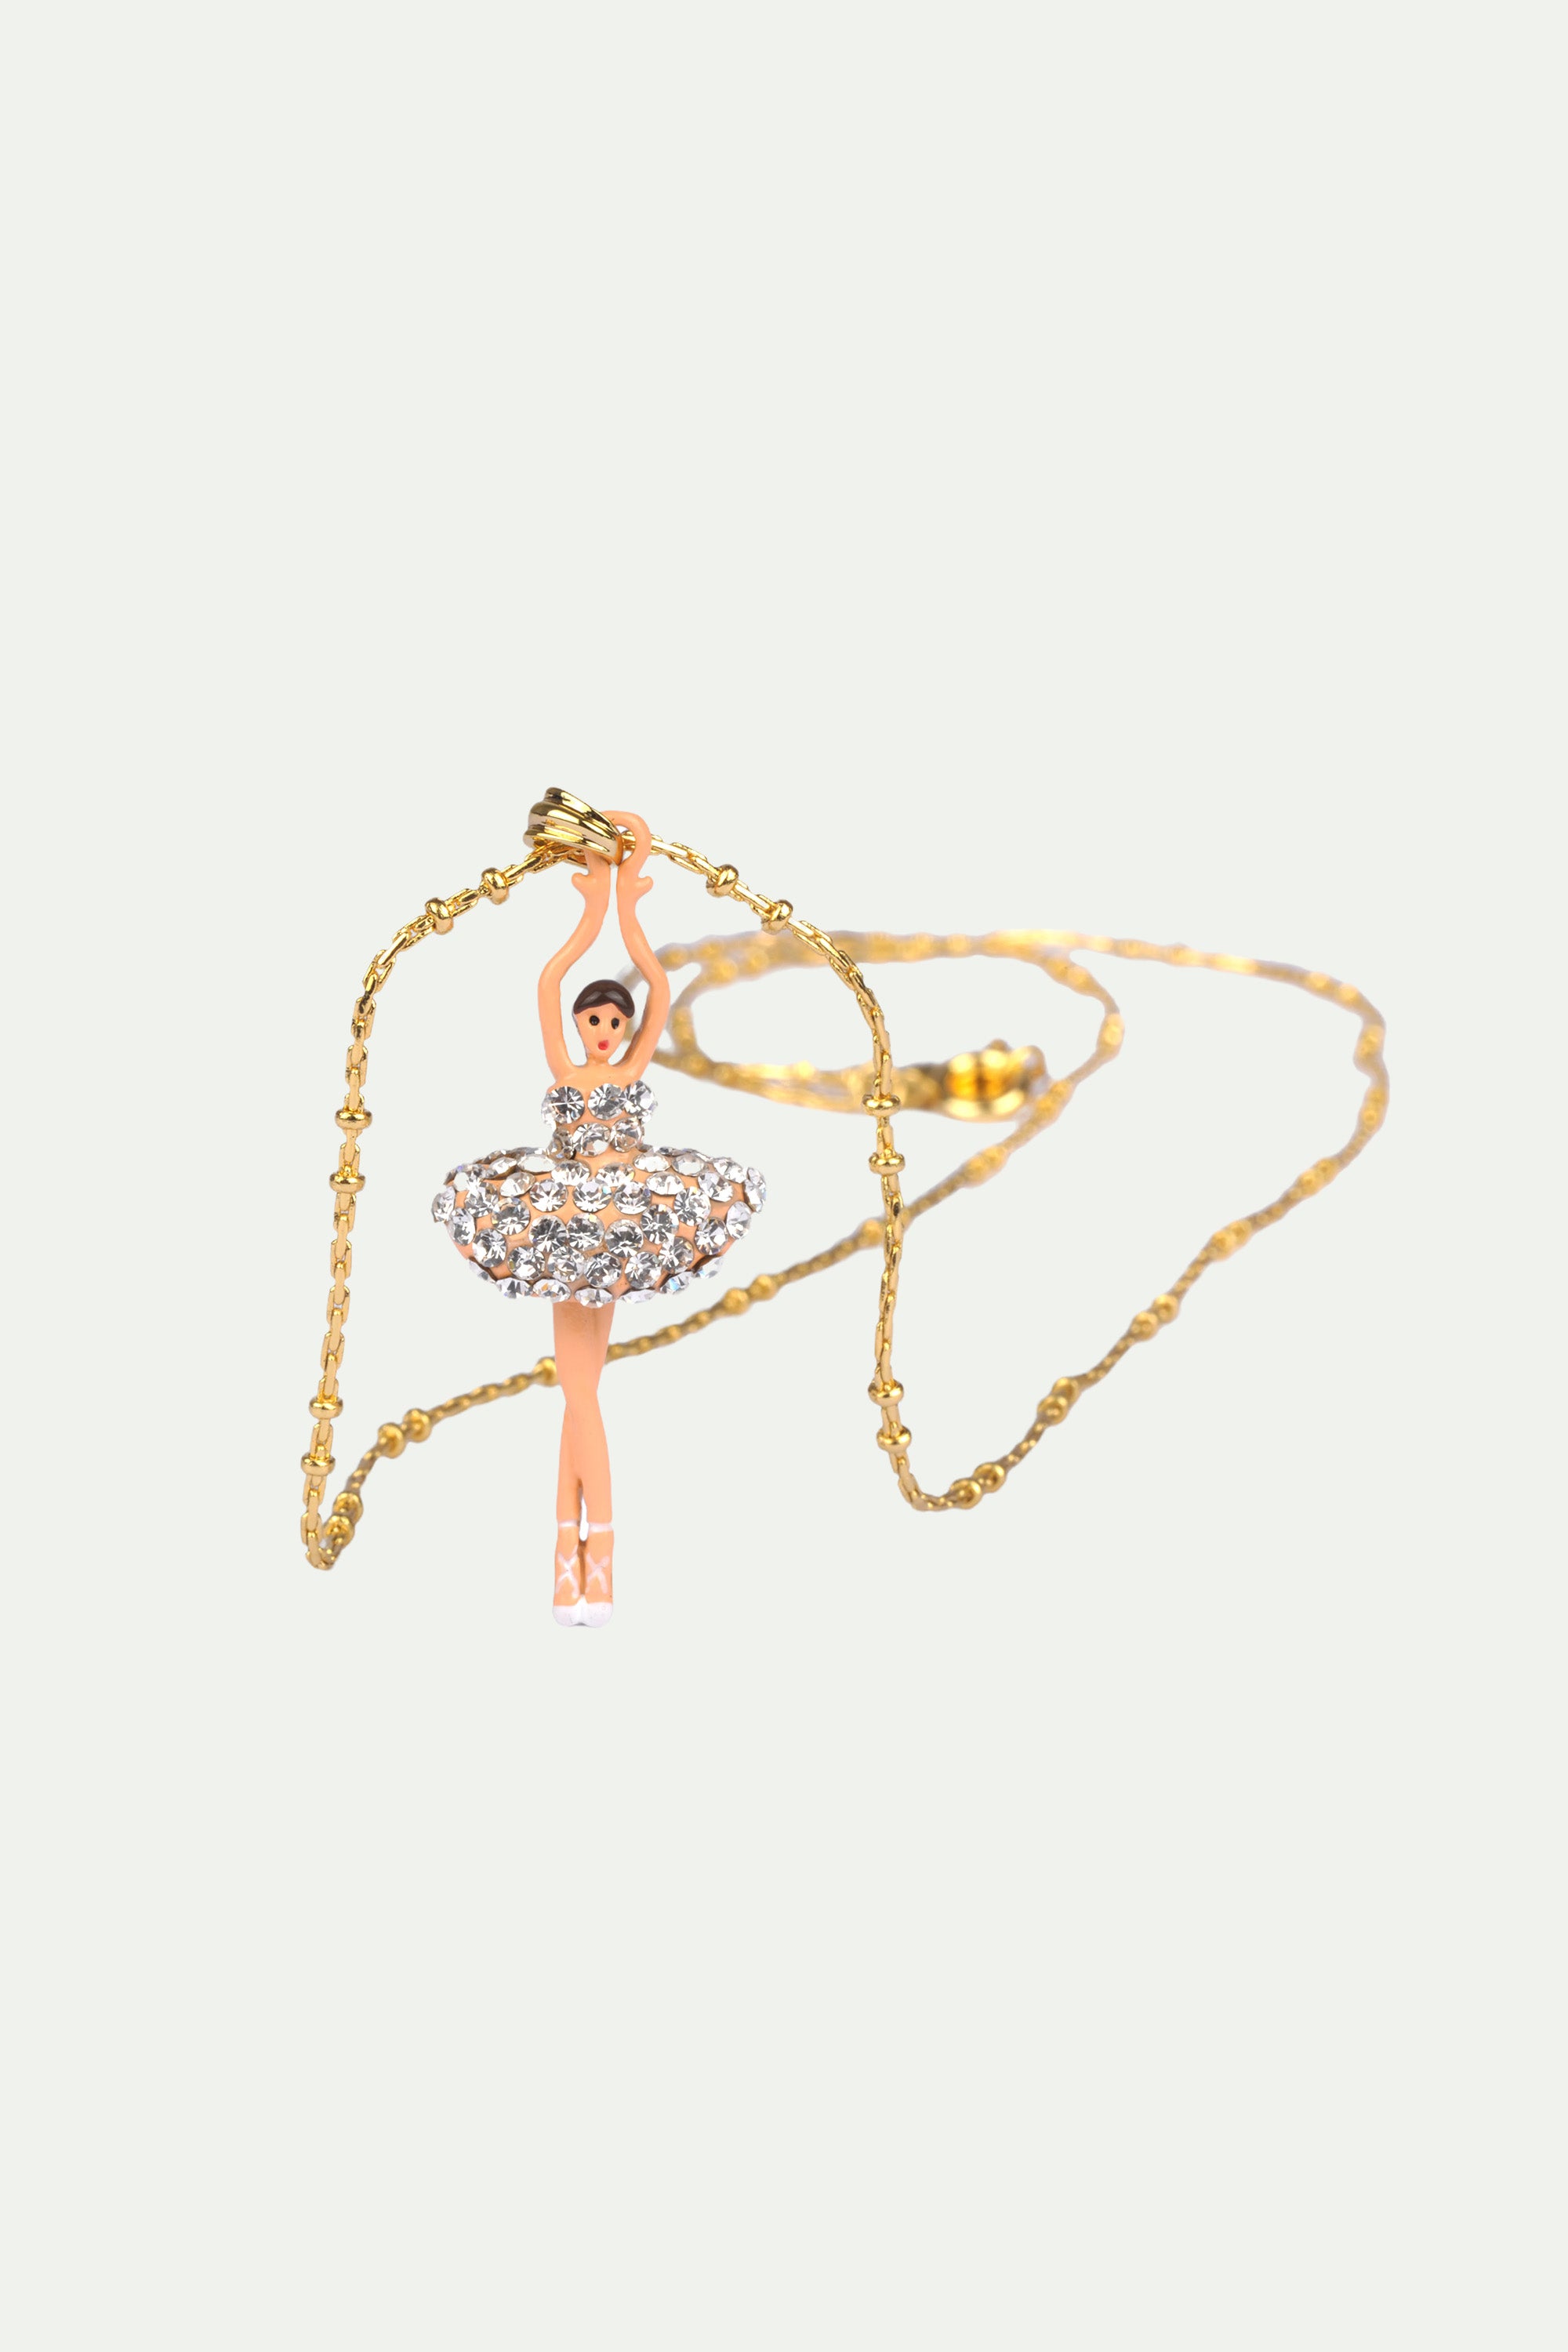 Pendant necklace with crystal toe-dancing ballerina